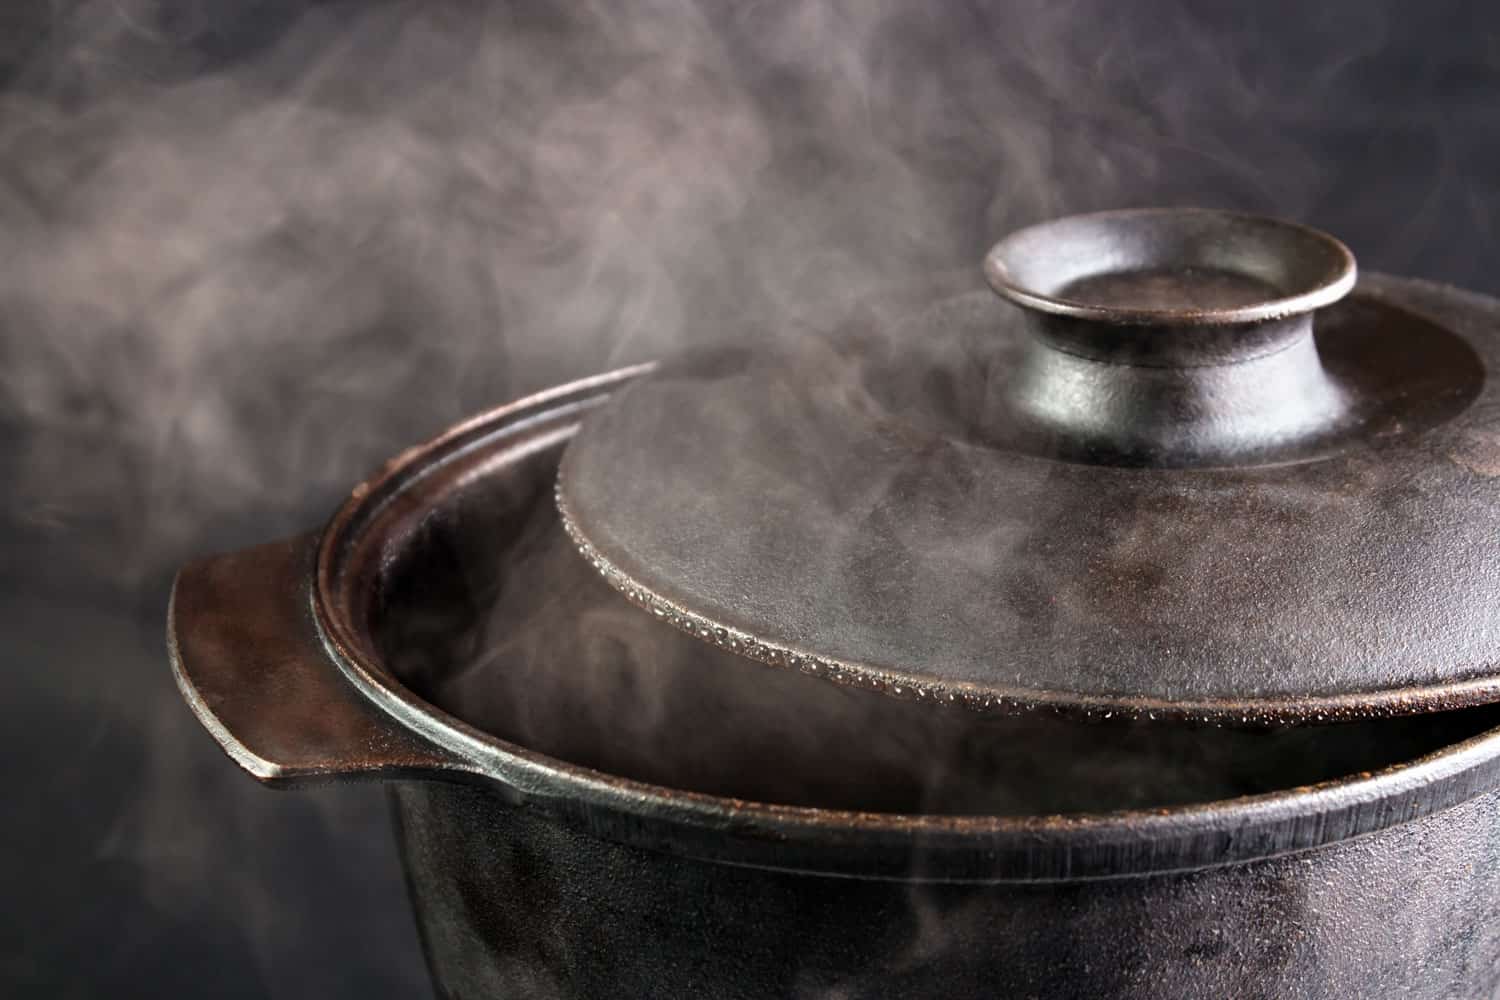 Steam coming out of a casserole